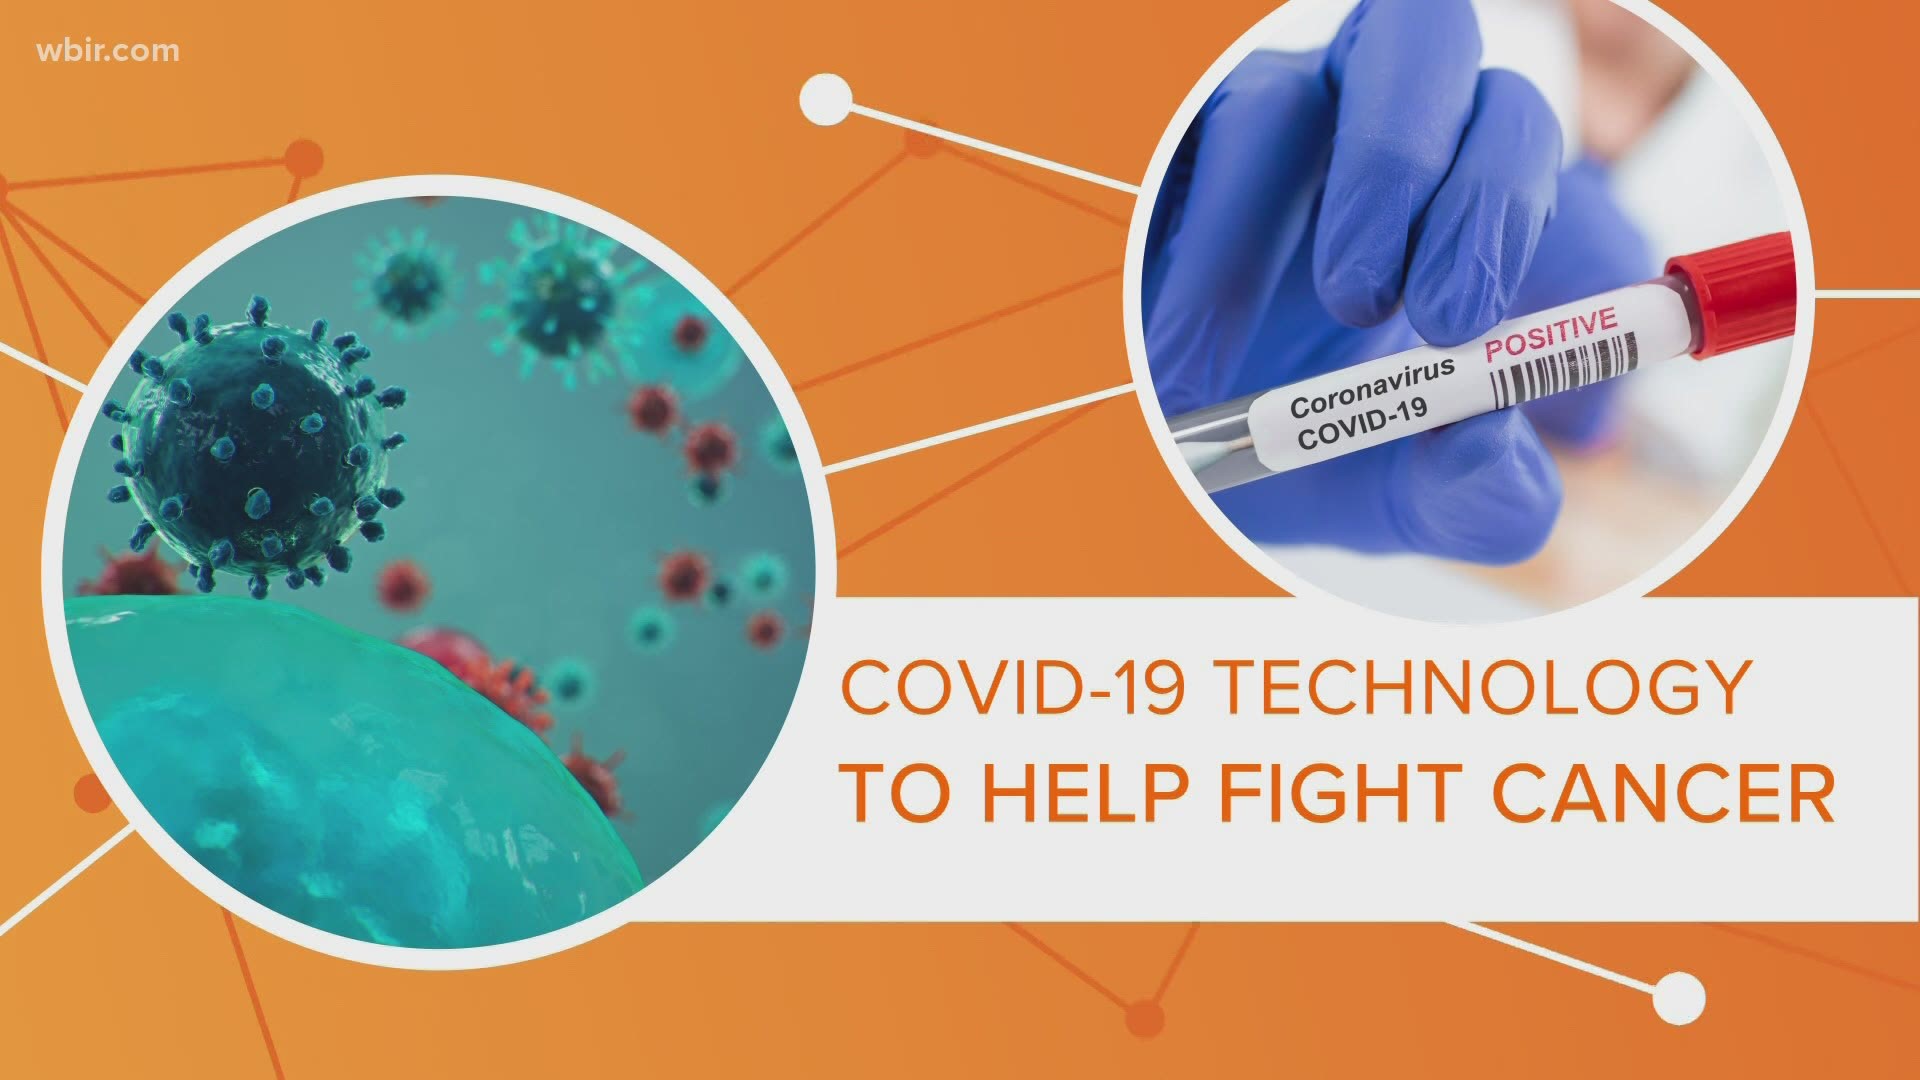 A COVID-19 vaccine breakthrough could help fight cancer in the future.